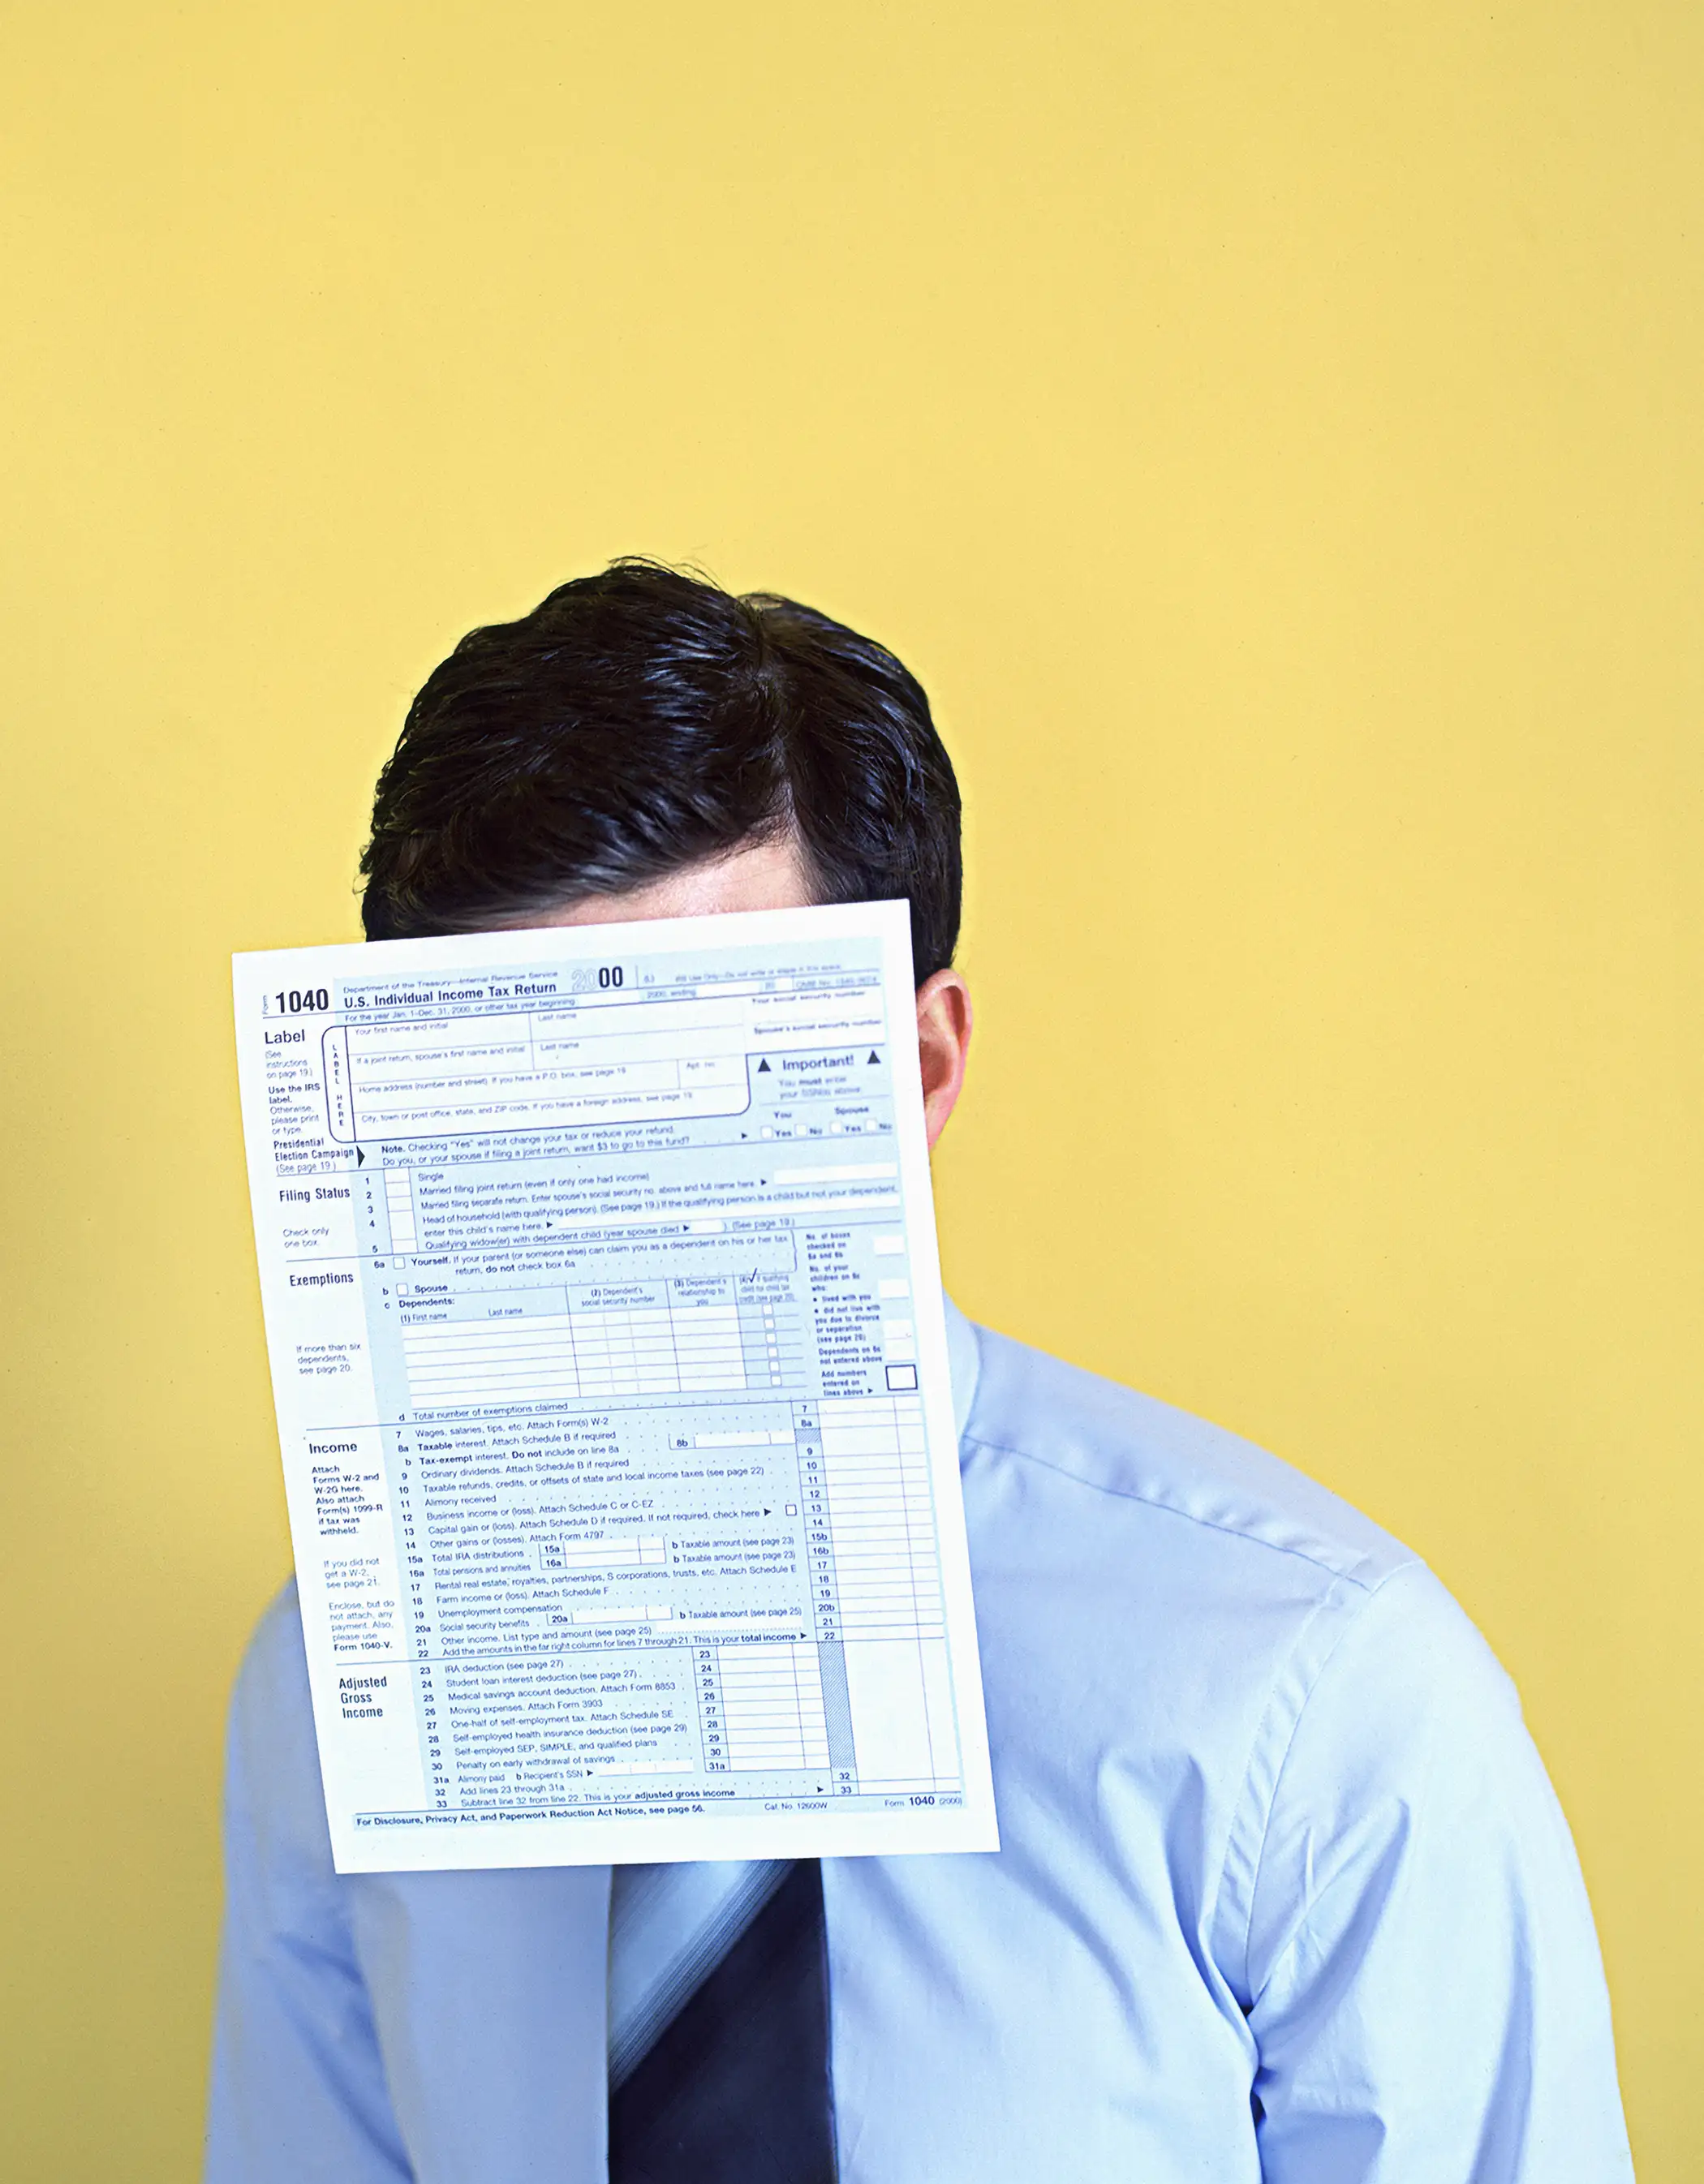 Man With 1040 tax form covering face